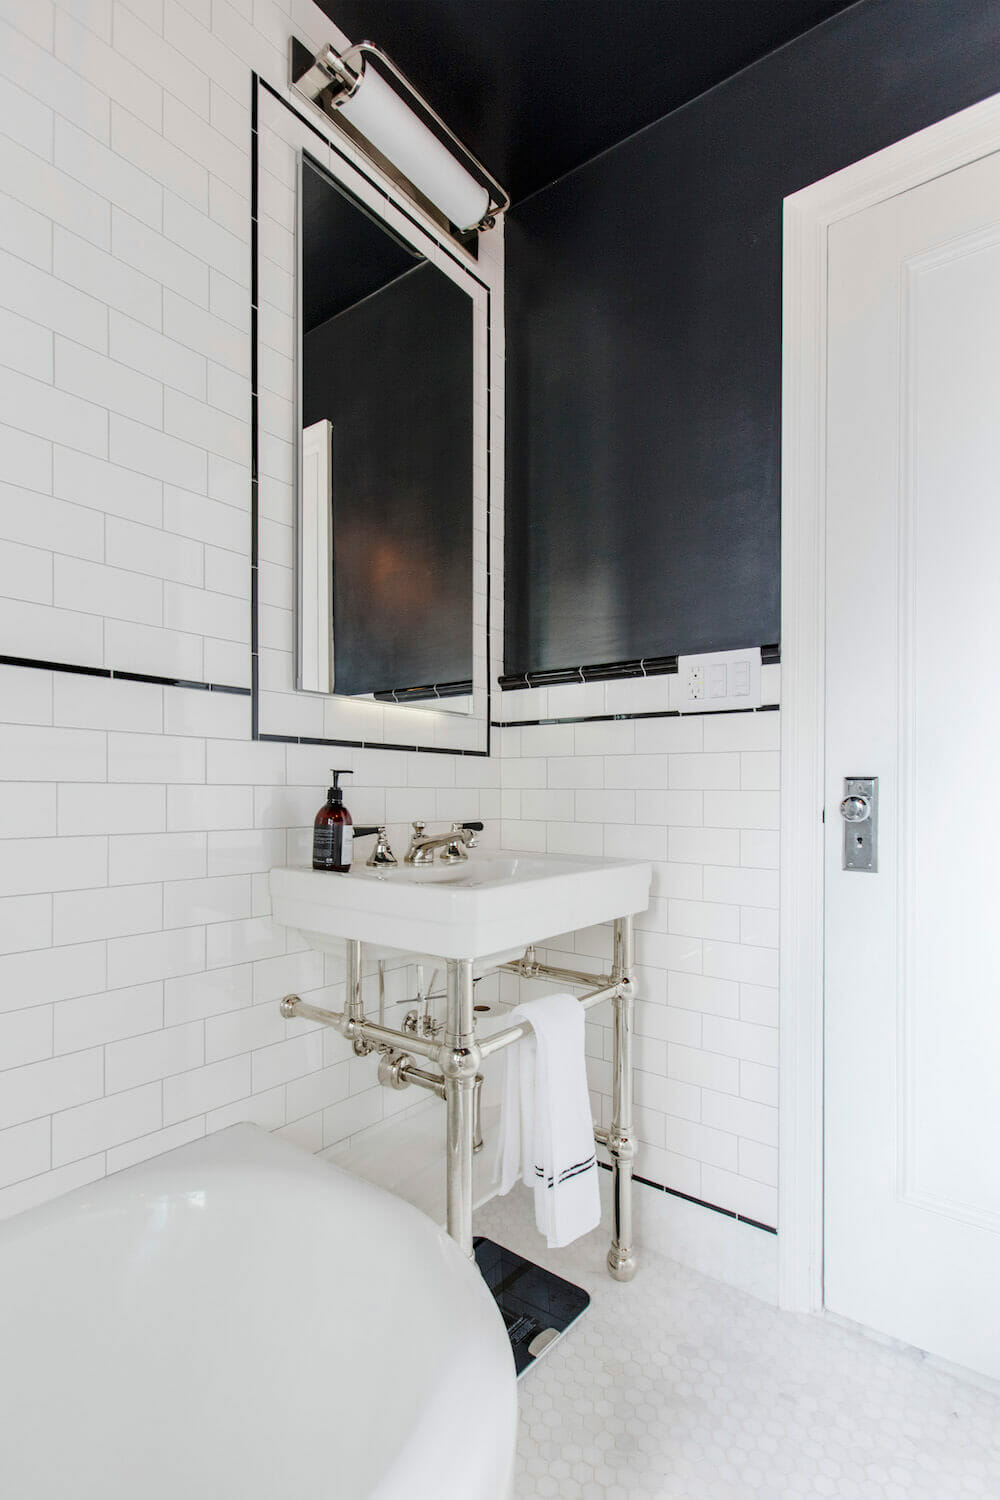 Image of pedestal sink on top of metal console legs